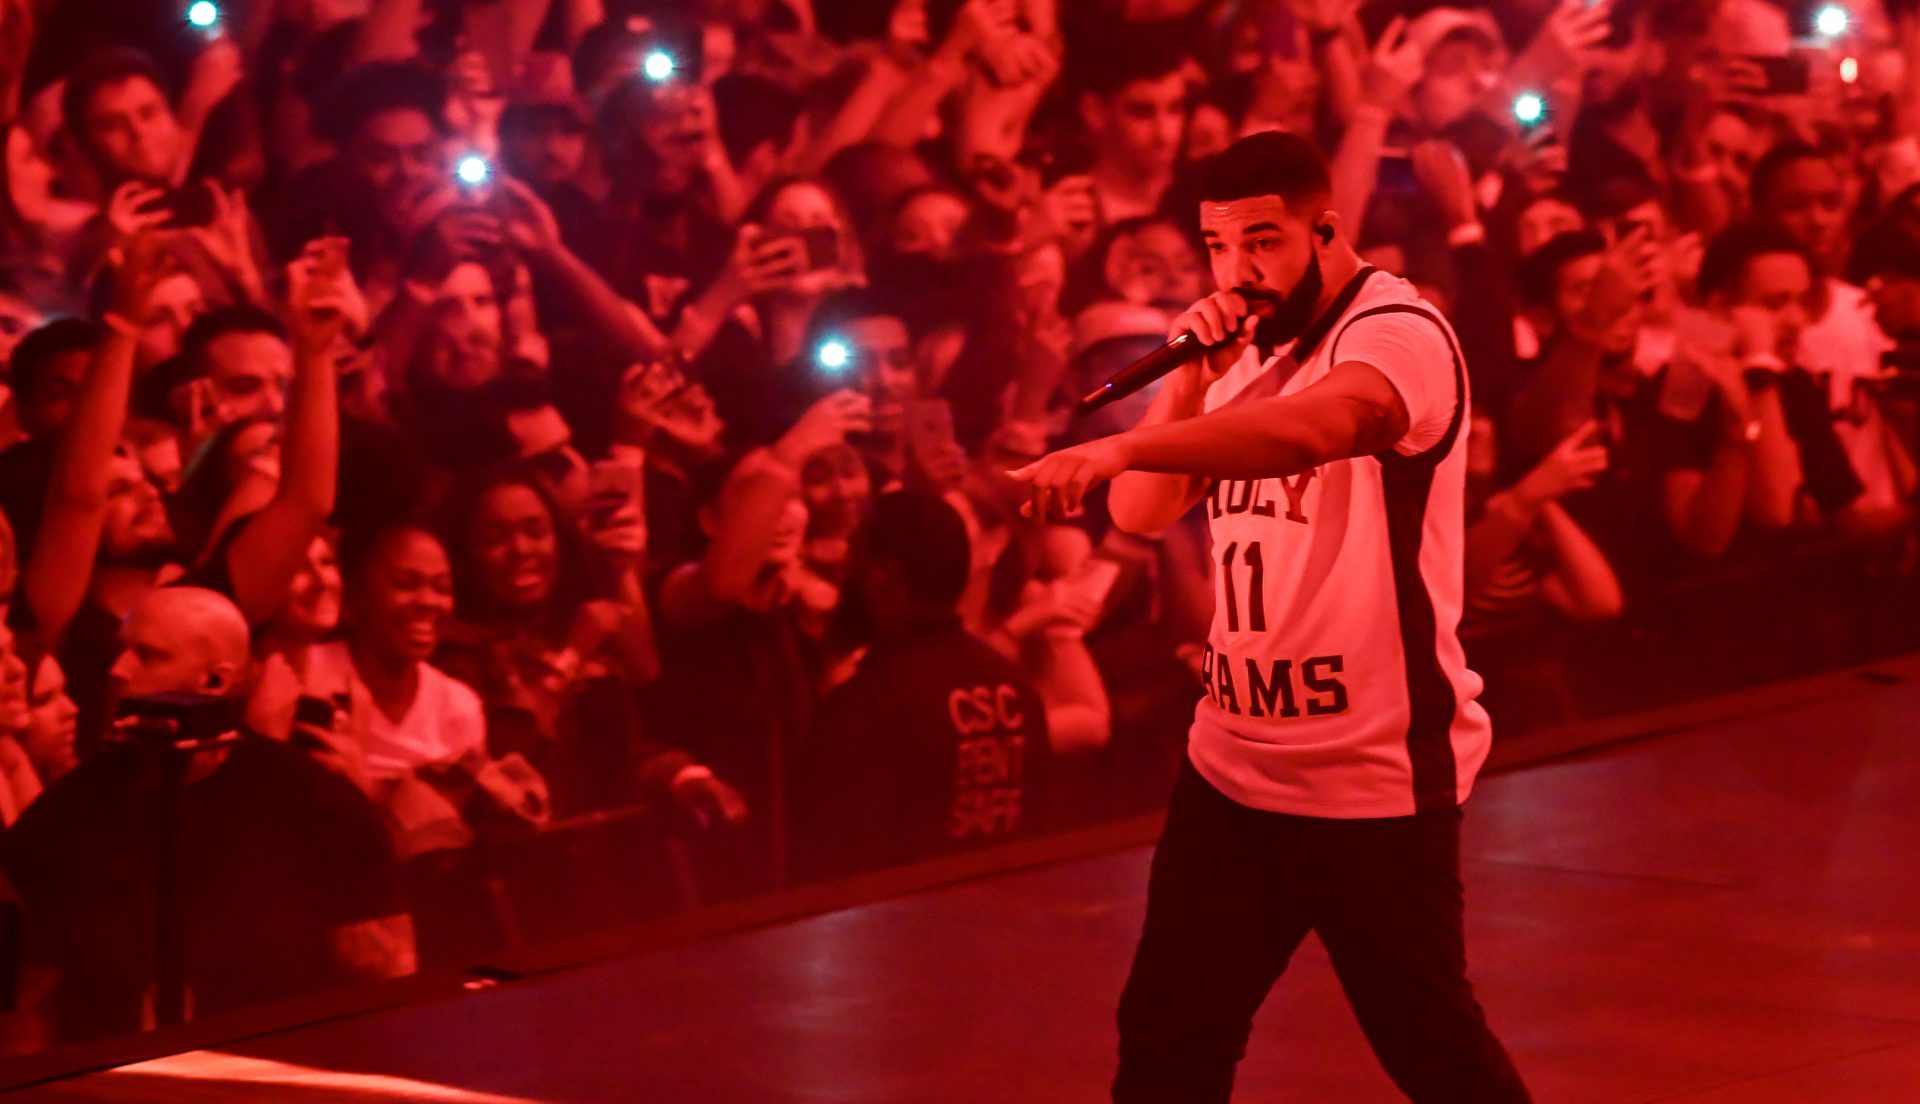 Drake Shocked By Huge Bra Thrown On Stage: 'This Can't Be Real